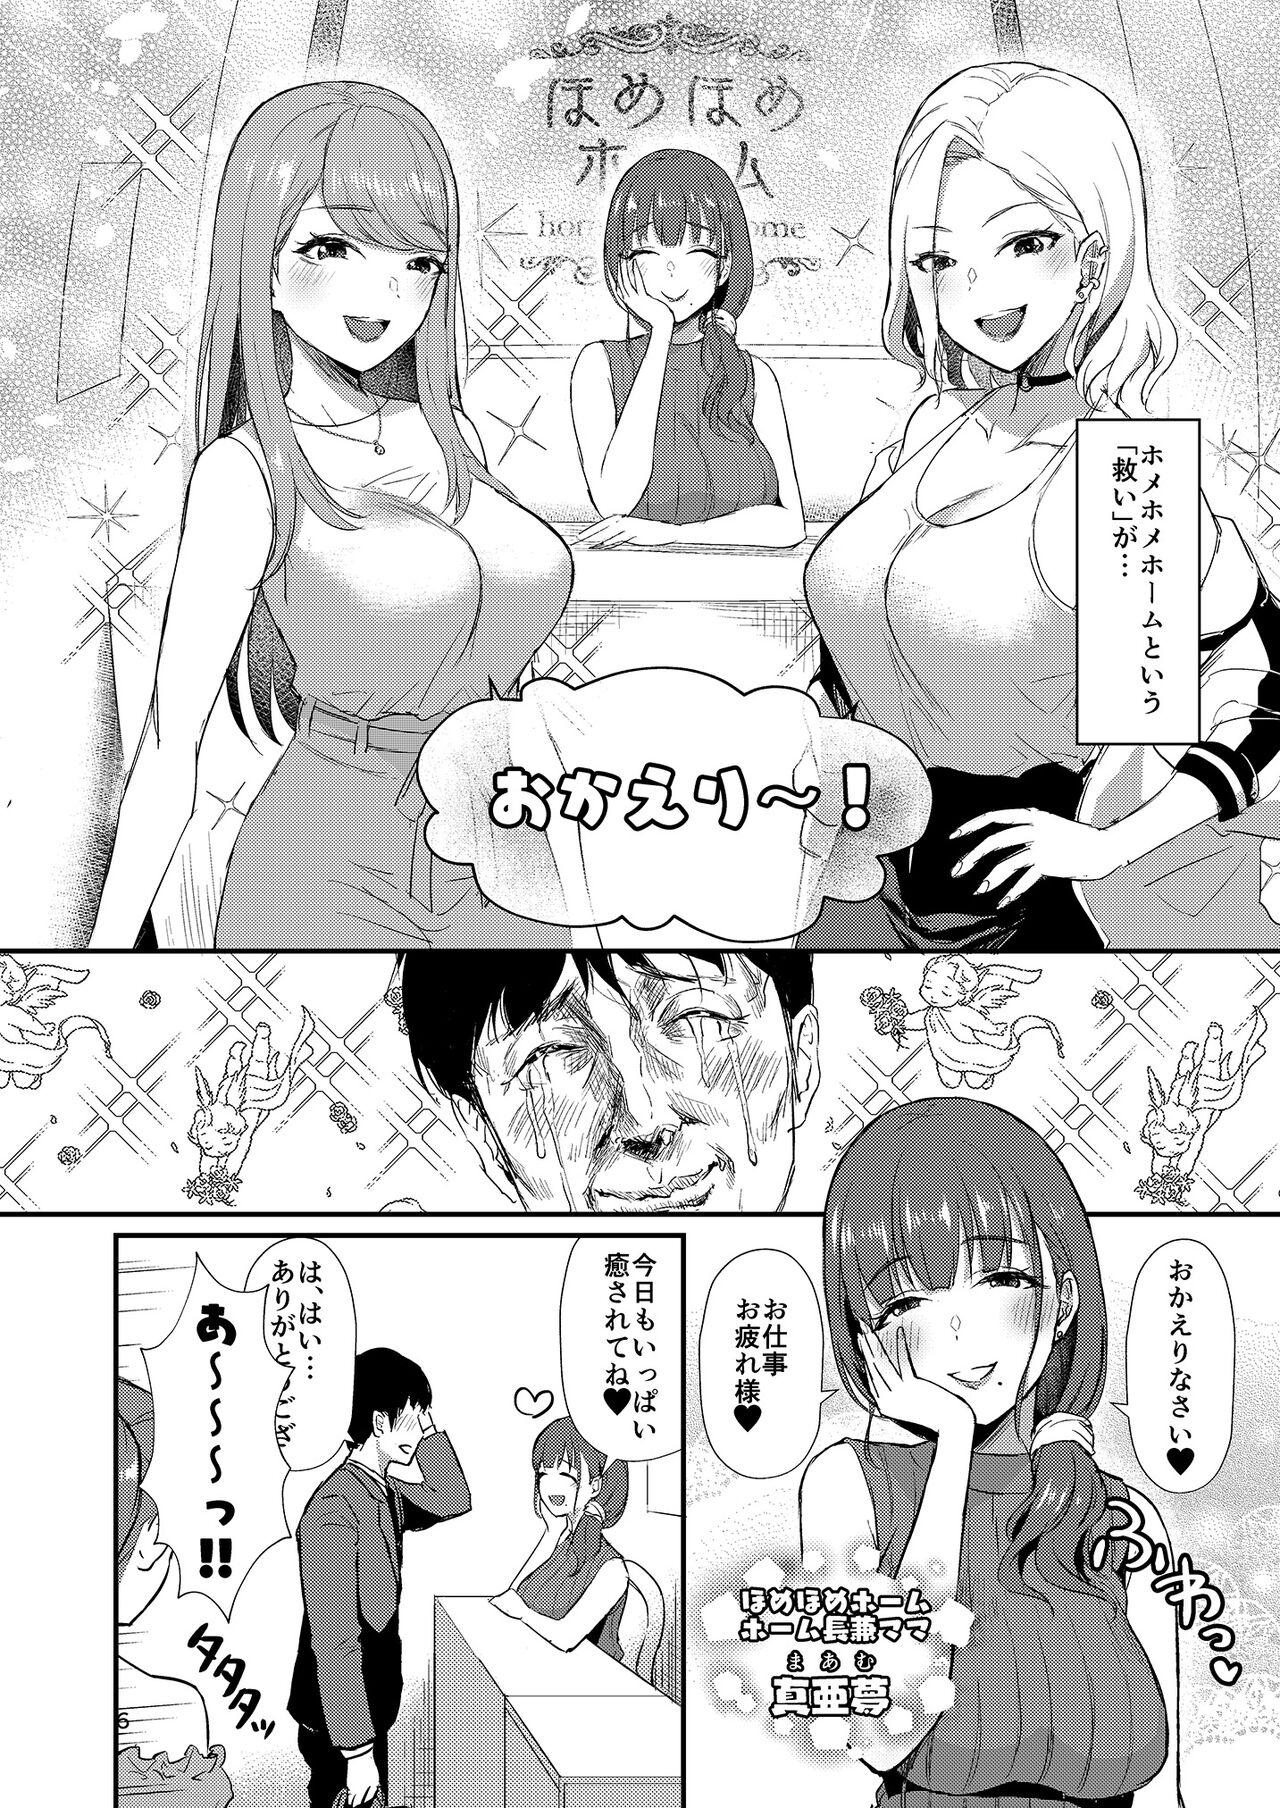 Best Blowjob Ever Homehome Home e Youkoso! - Welcome to Home Home Home! - Original Groping - Page 6